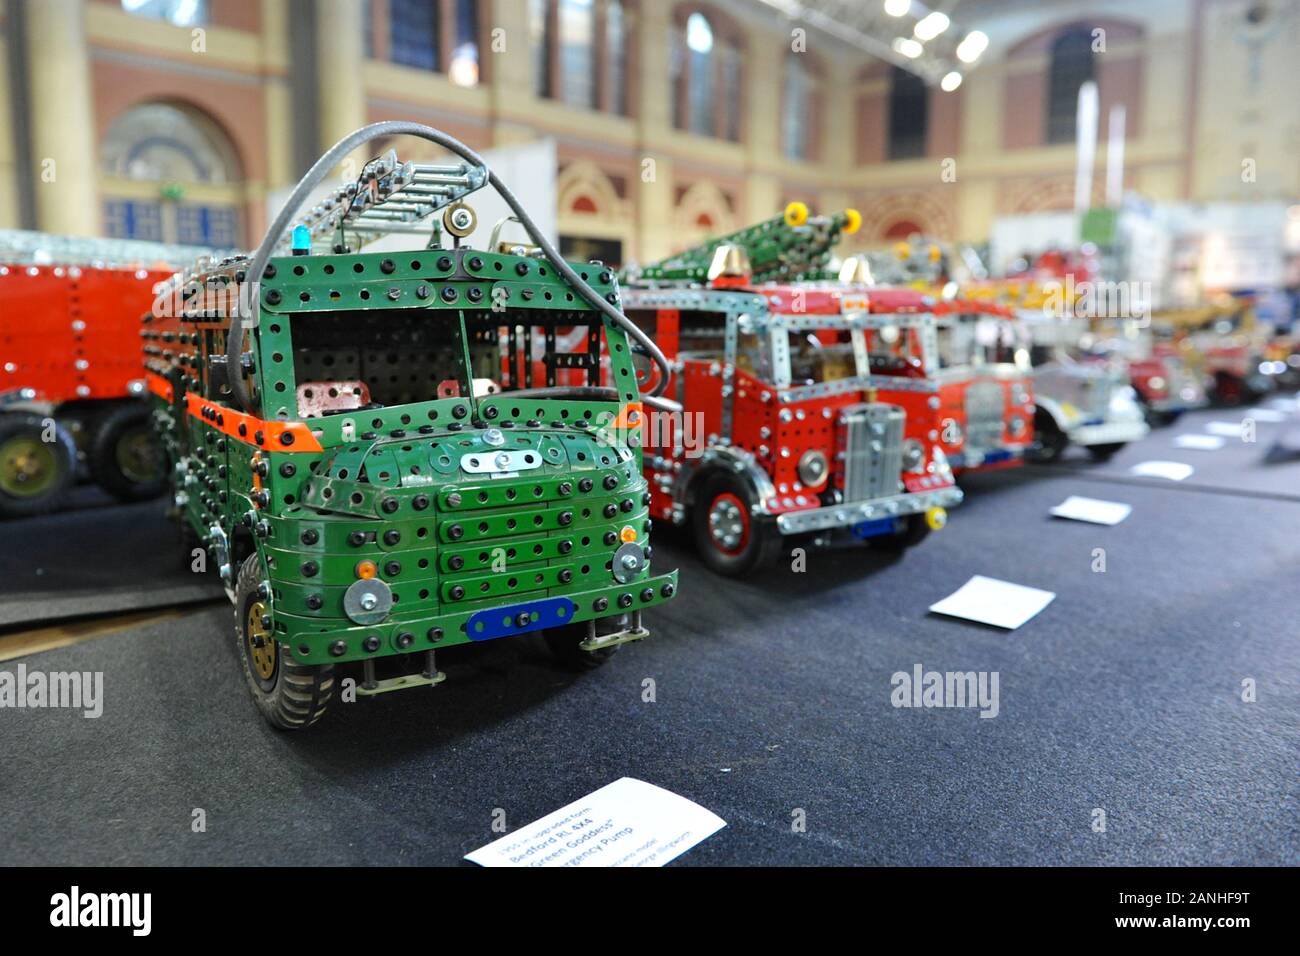 A Meccano model of a Green Goddess Fire Engine (Bedford RL 4X4) on display  on the opening day of the London Model Engineering Exhibition opened today  at Alexandra Palace, London. The model